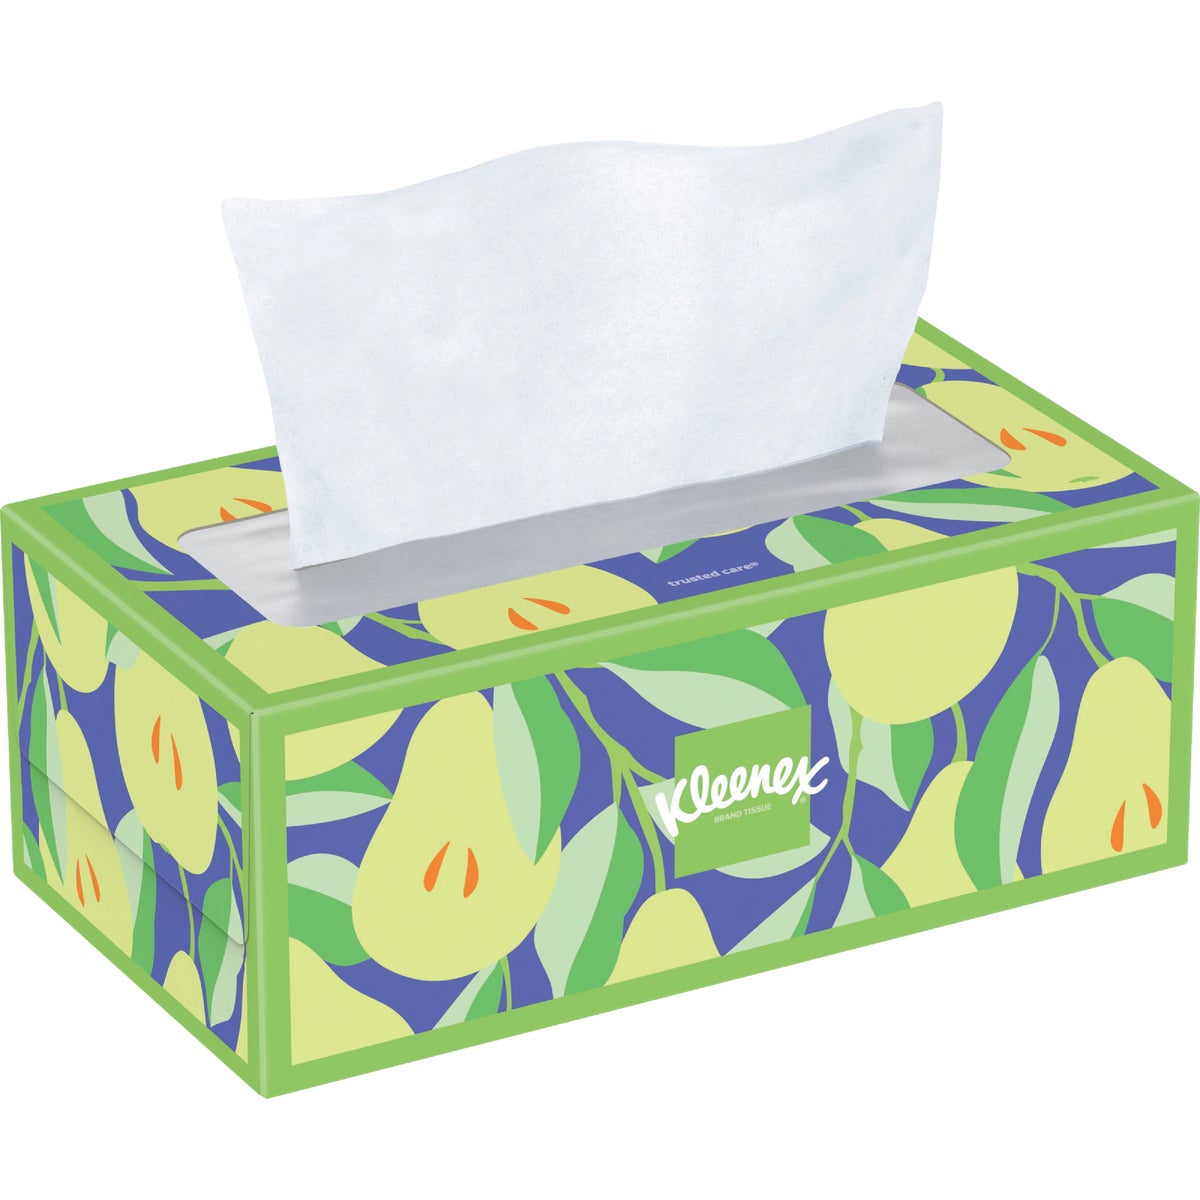 Kleenex Trusted Care 160 Count 2-Ply White Facial Tissue